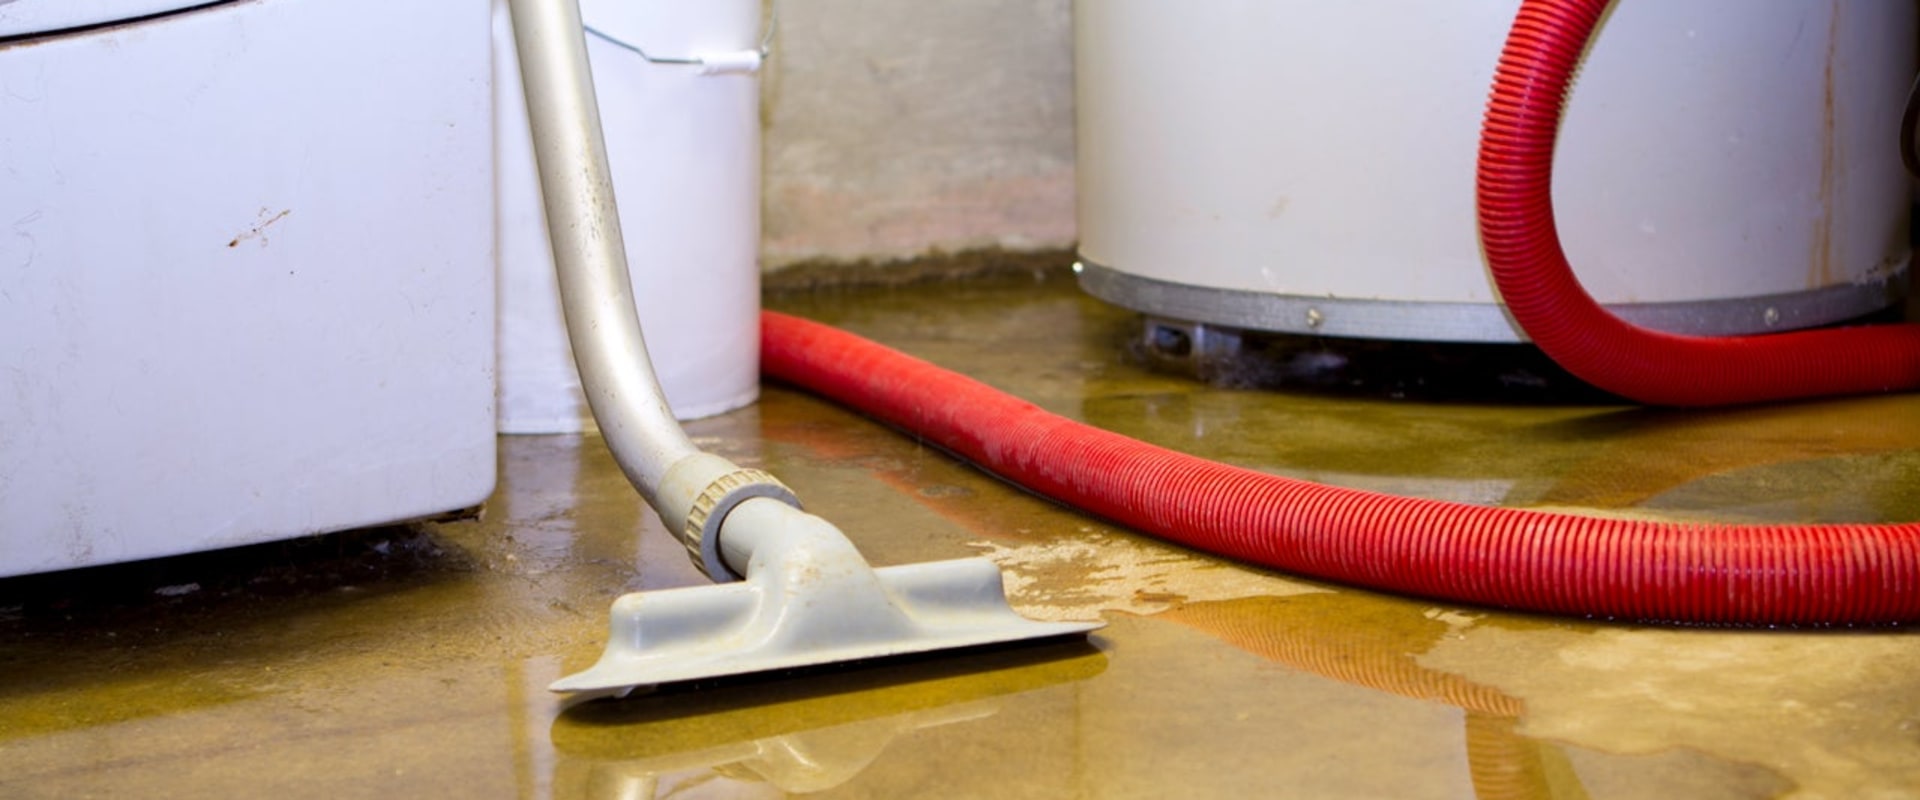 Will homeowners insurance cover water damage?